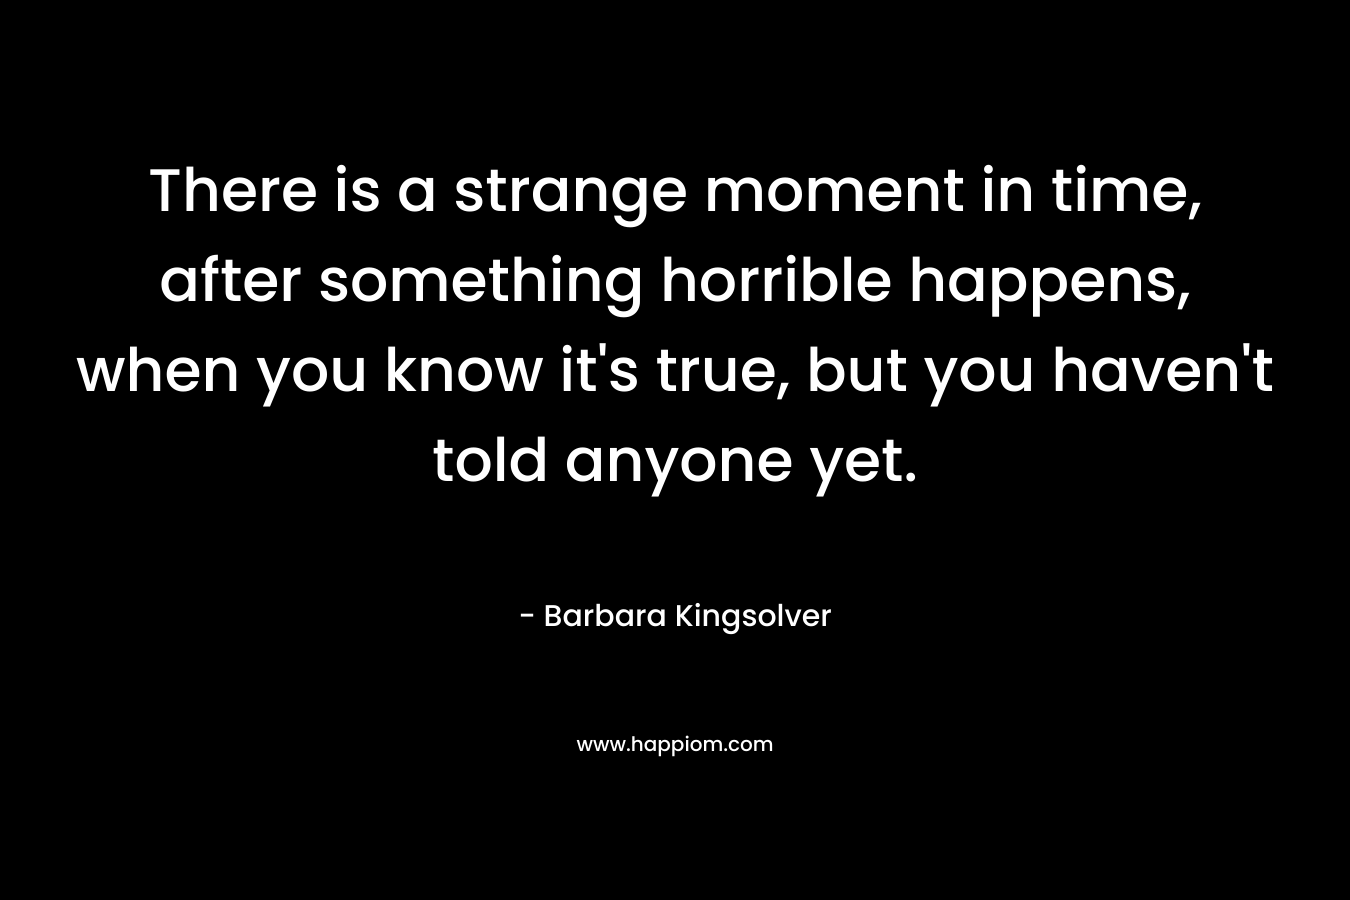 There is a strange moment in time, after something horrible happens, when you know it's true, but you haven't told anyone yet.